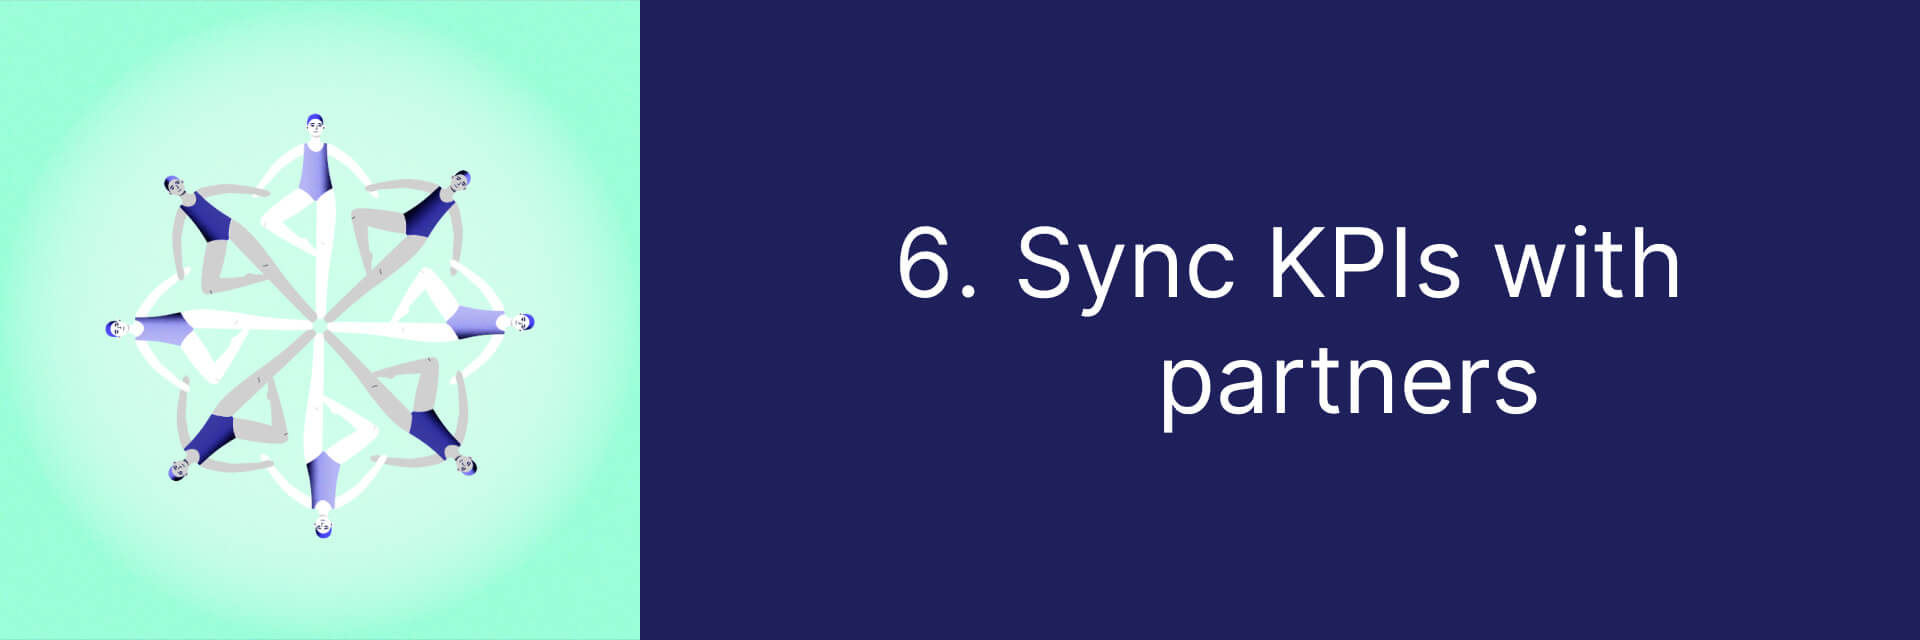 Sync KPIs with partners